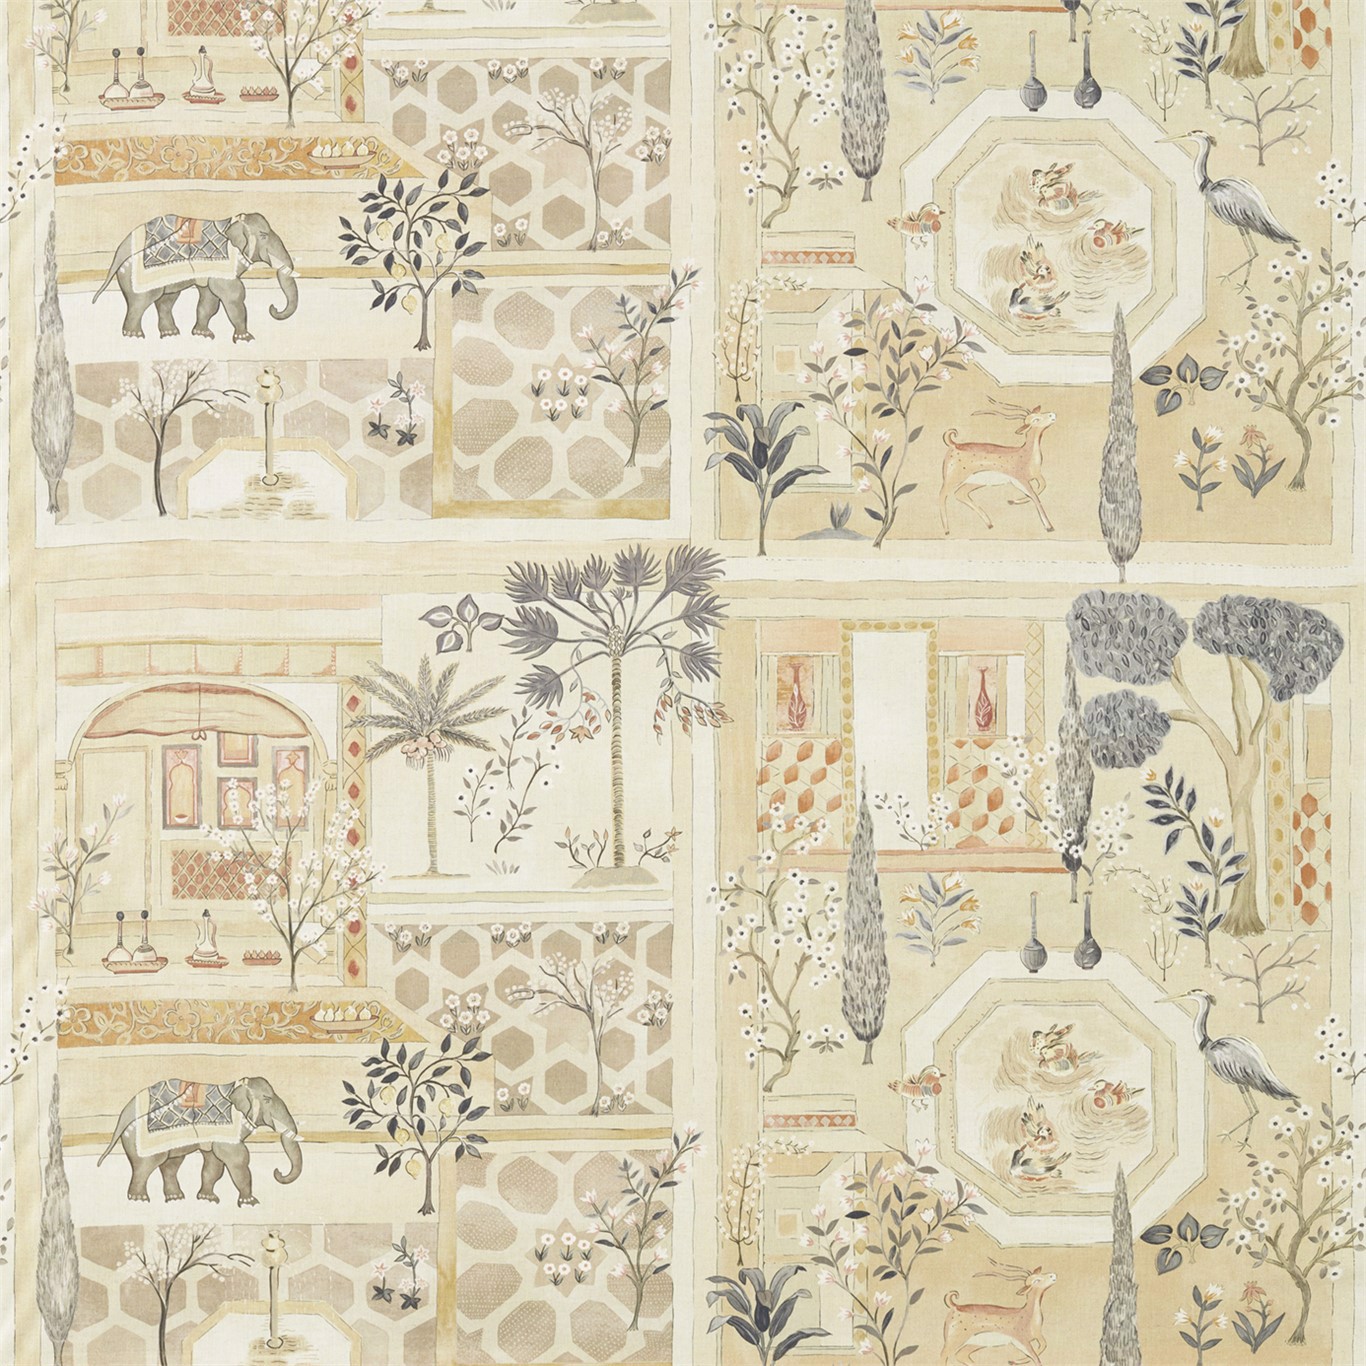 Sultans Garden Sepia/Amber Fabric by SAN